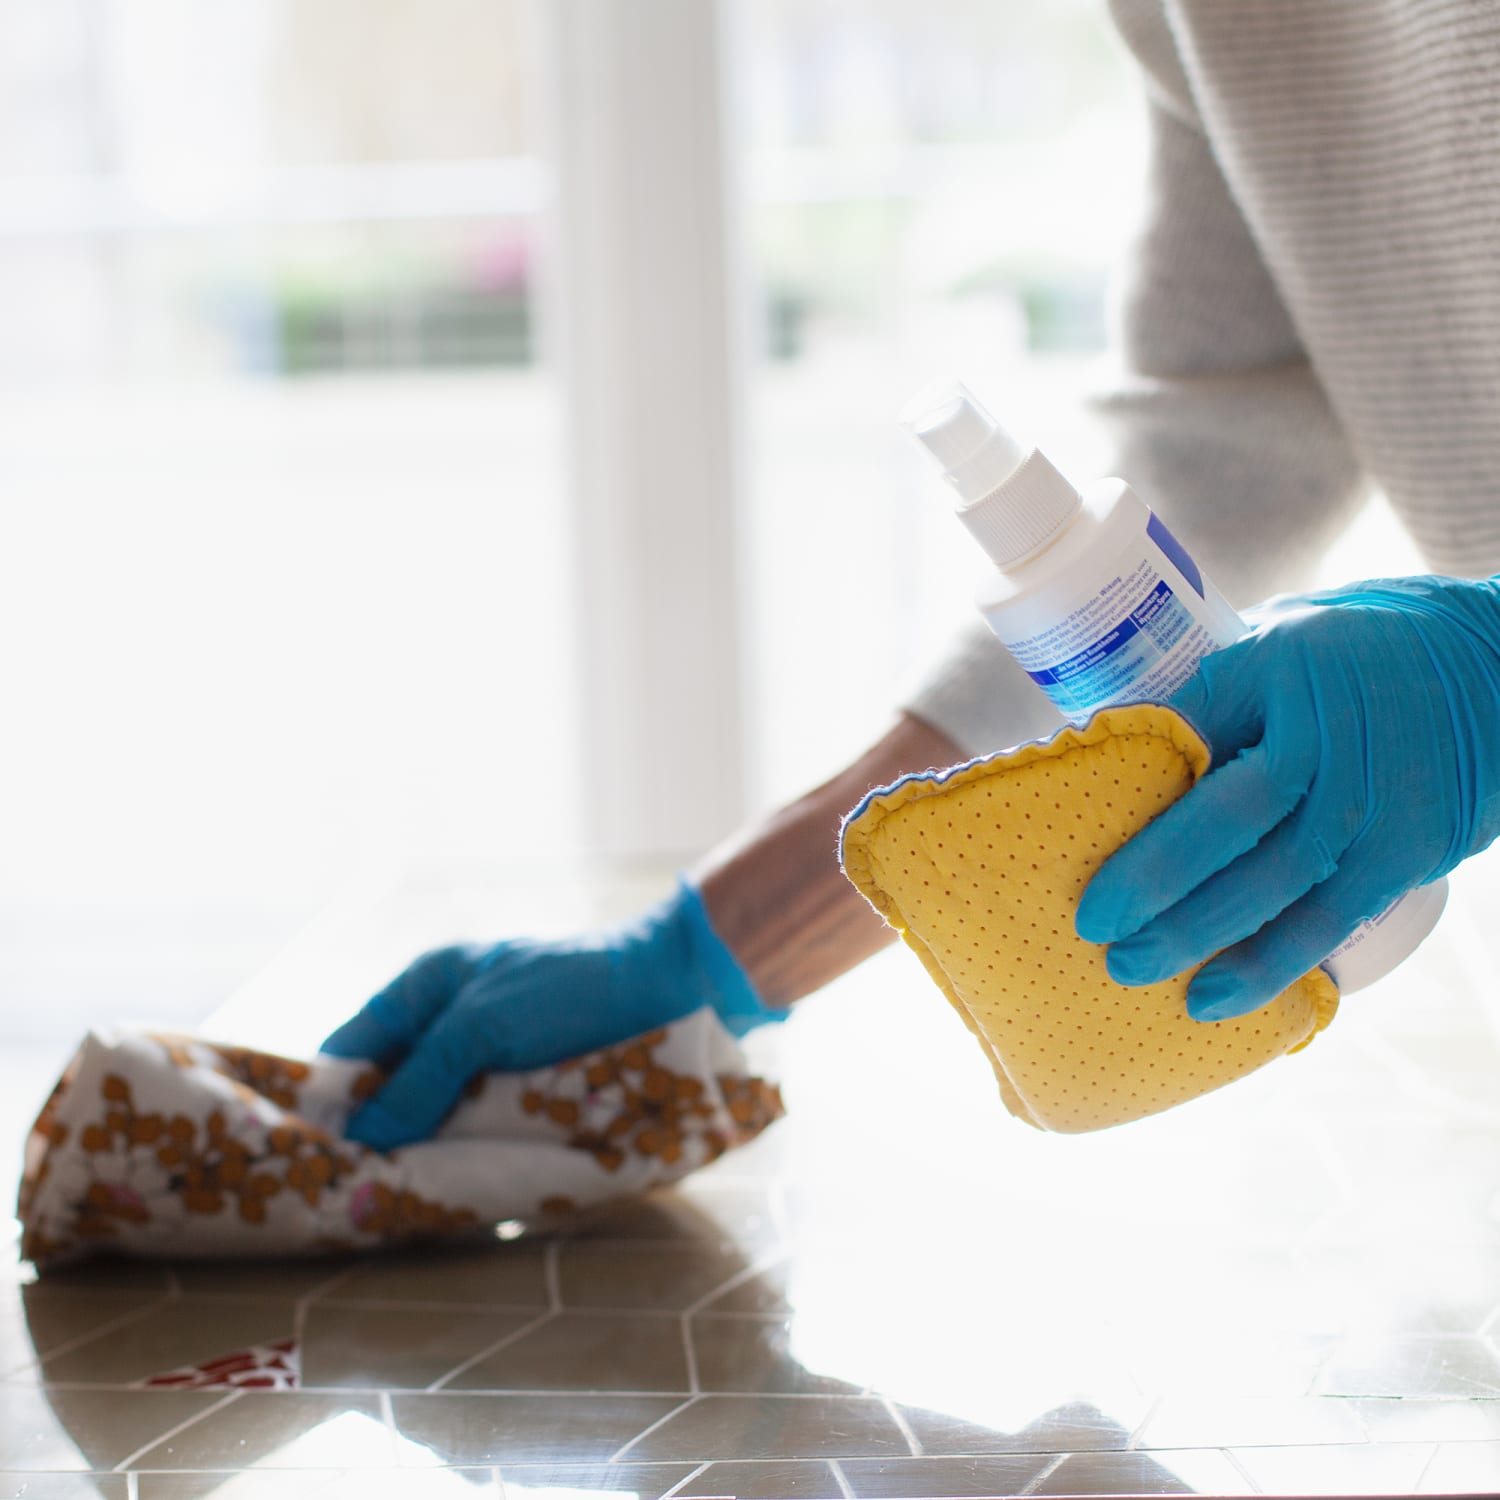 You may be using cleaning wipes wrong, according to the CDC - Reviewed